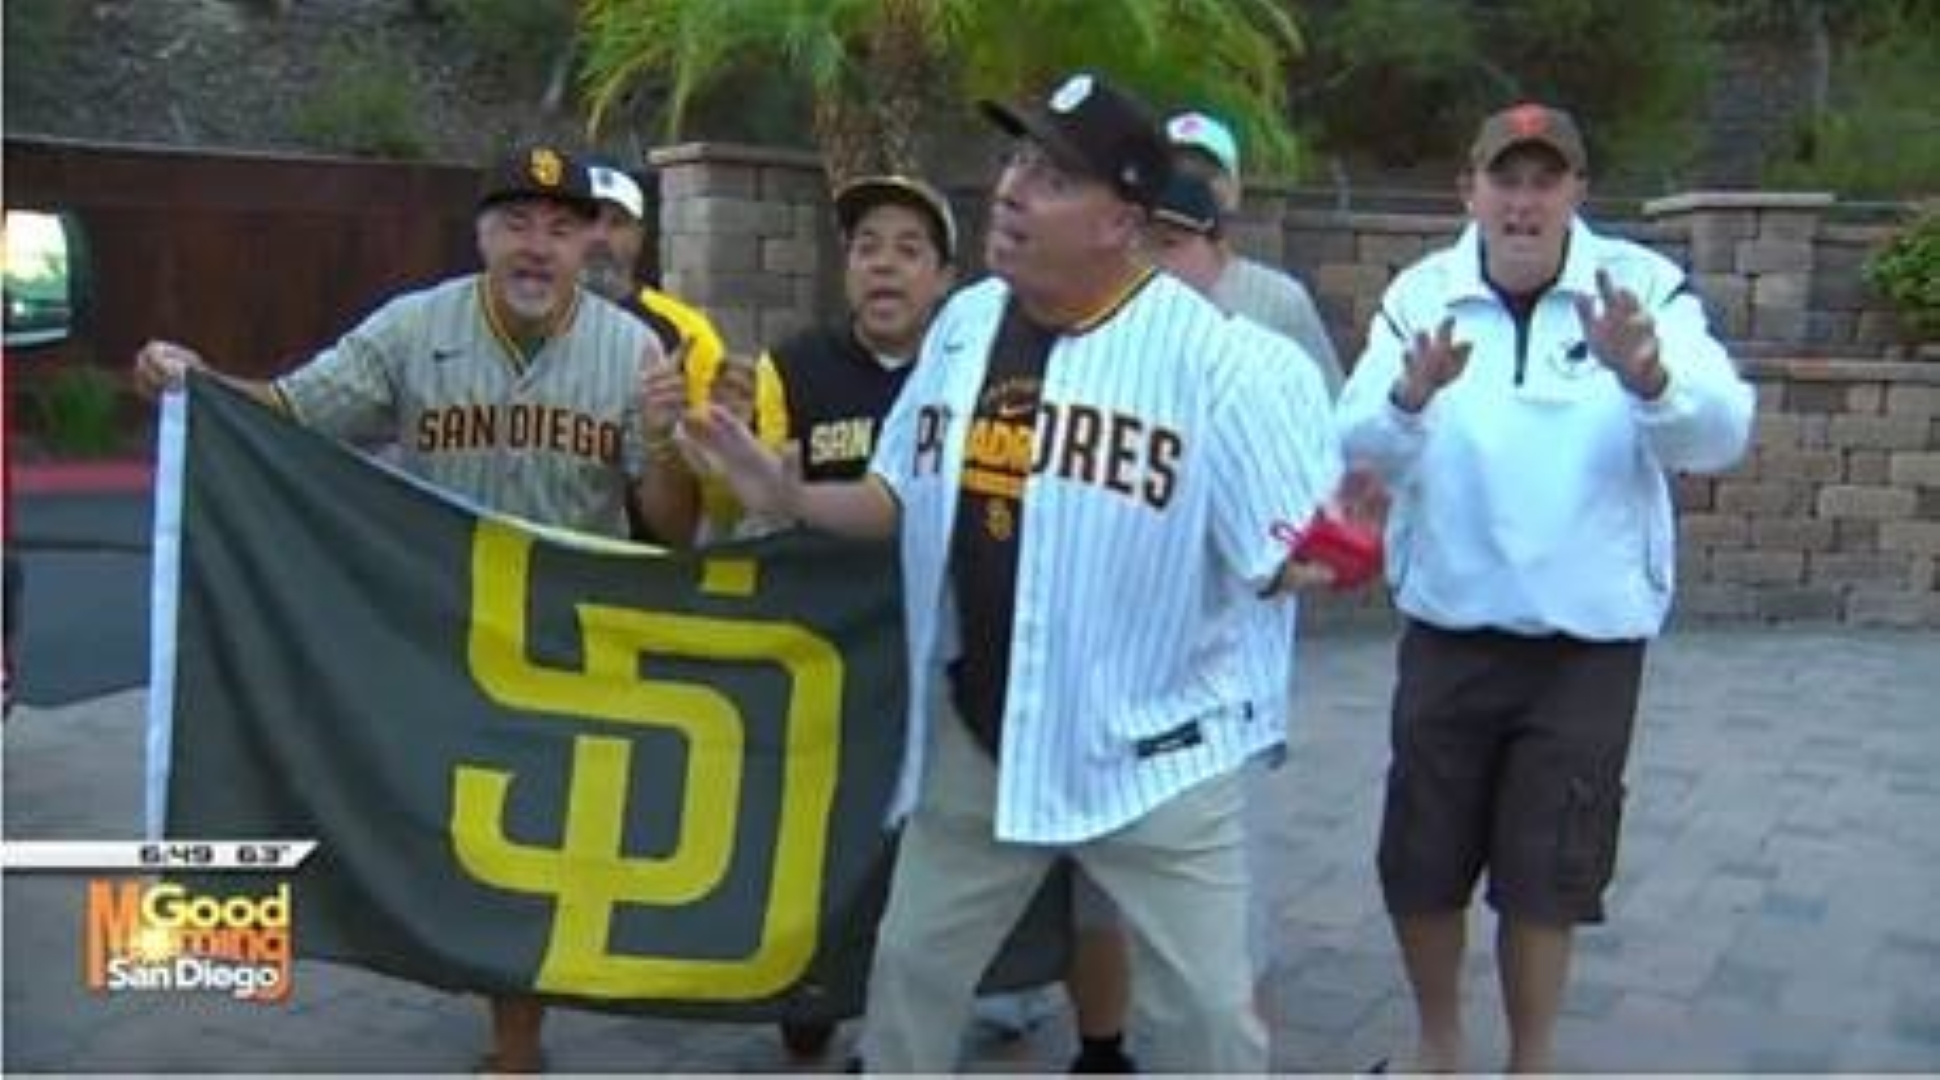 San Diego Padres fans gear for NLCS